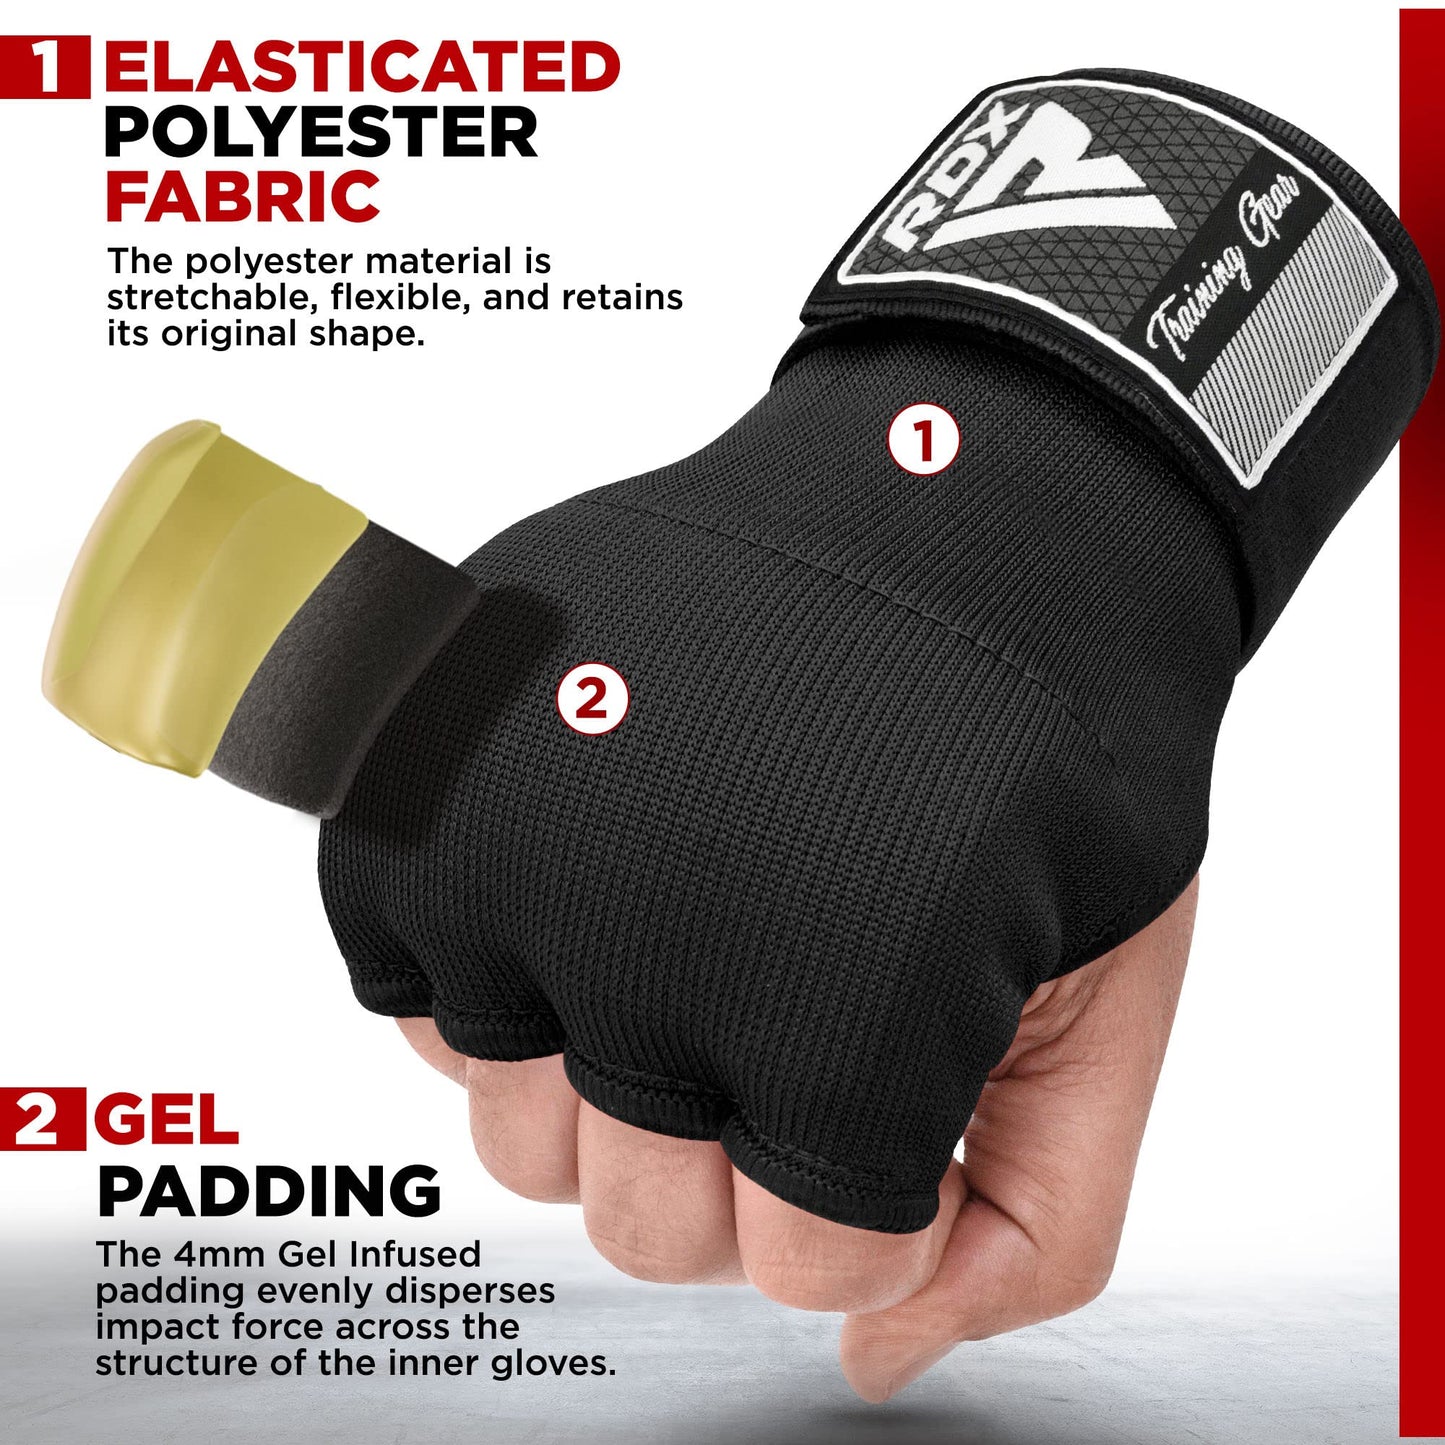 RDX Gel Boxing Hand Wraps Inner Gloves, Quick 75cm Long Wrist Straps, Elasticated, Padded Fist Hand Protection, Muay Thai MMA Martial Arts Punching Speed Bag Training Bandages, Under Mitts Handwraps